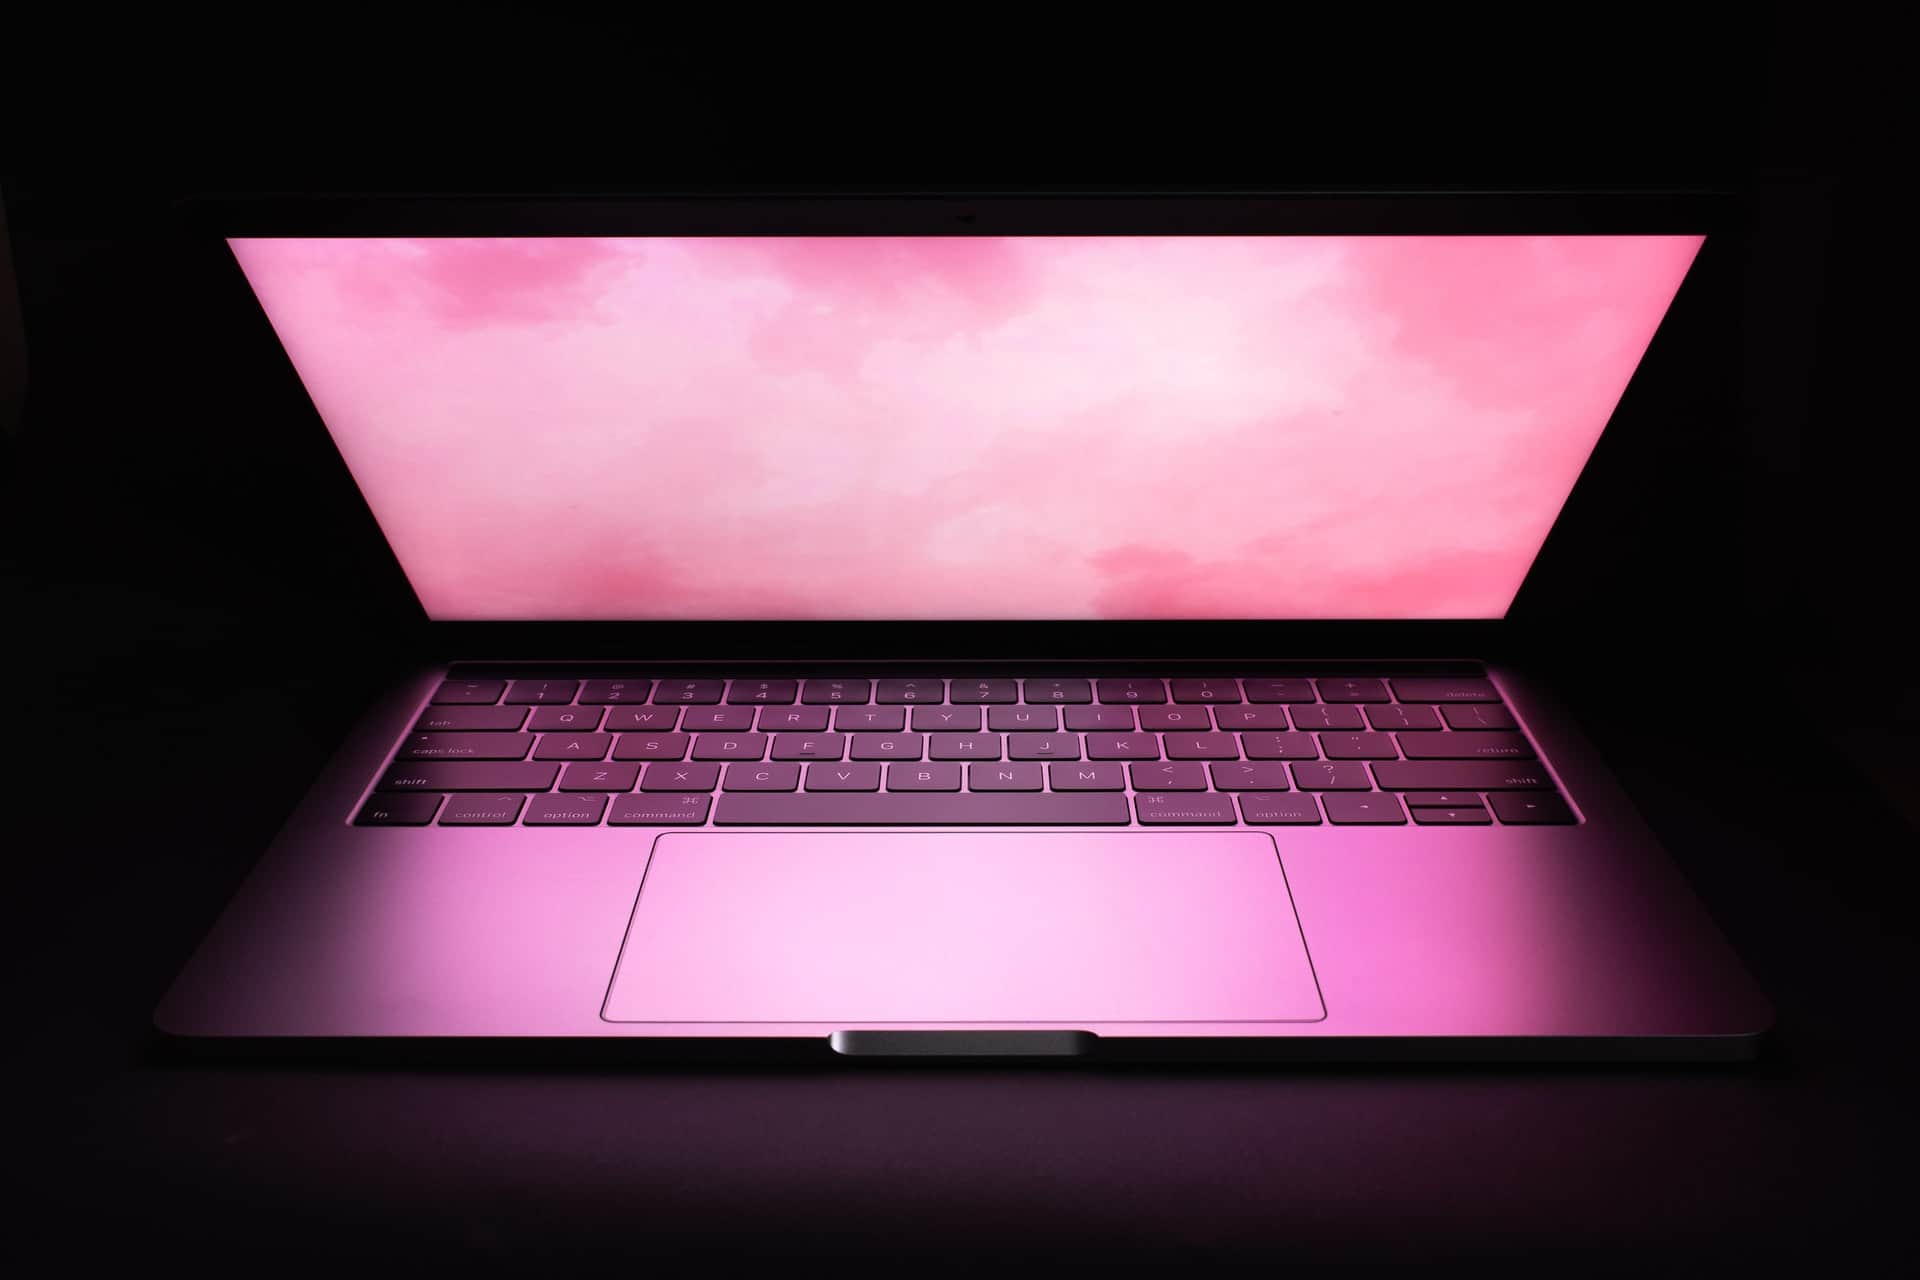 How to Repair a Pink Laptop Screen